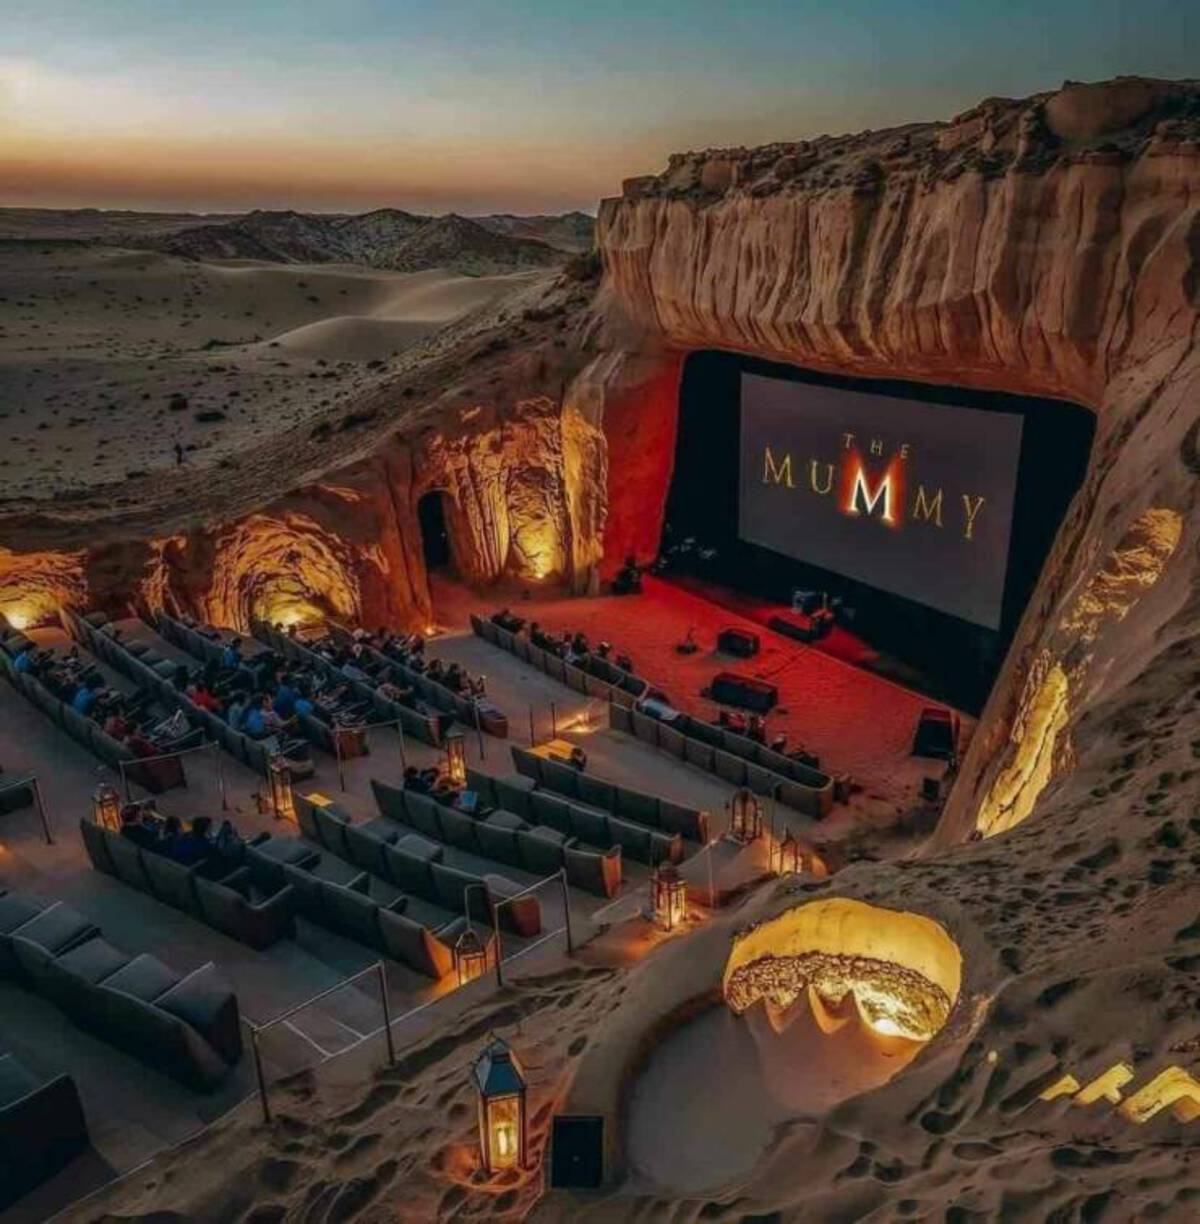 open air theatre in egypt - The Mummy